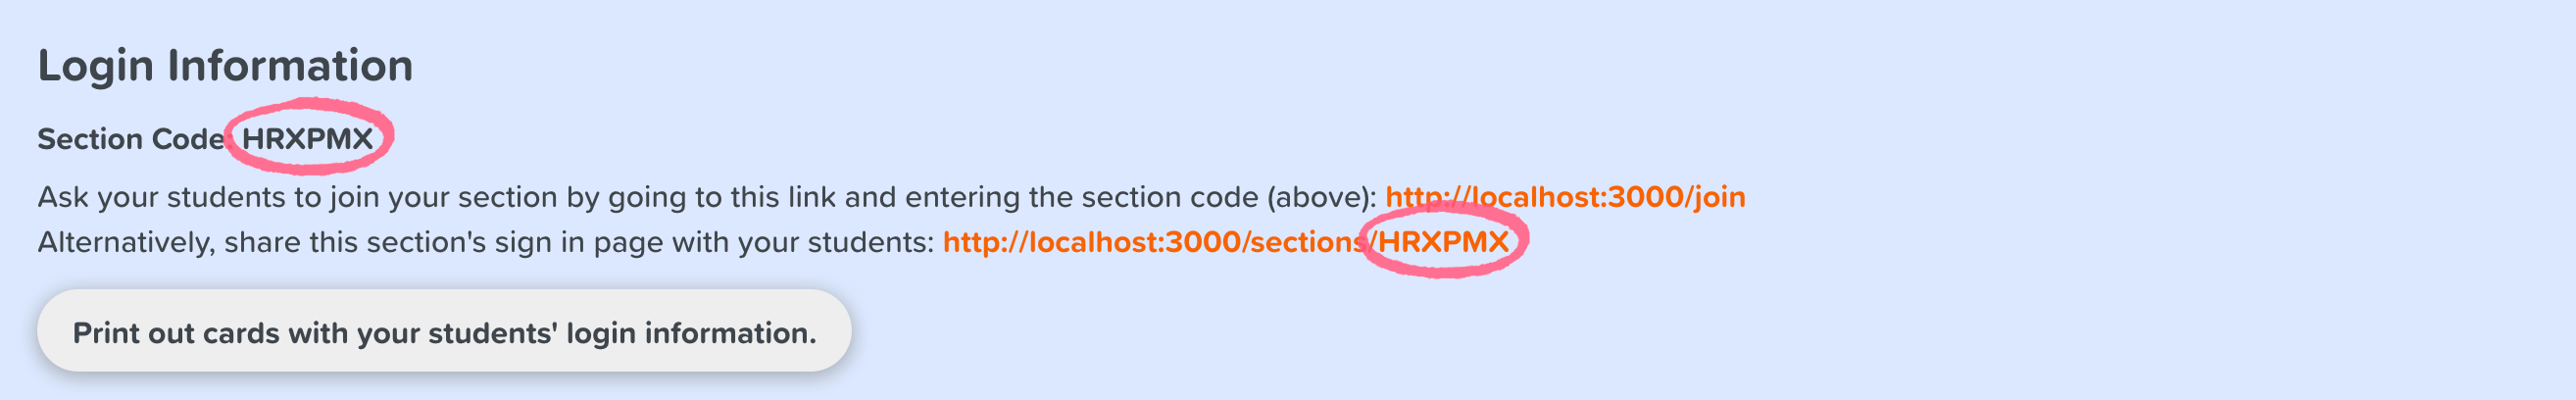 Section code displayed in login infmation